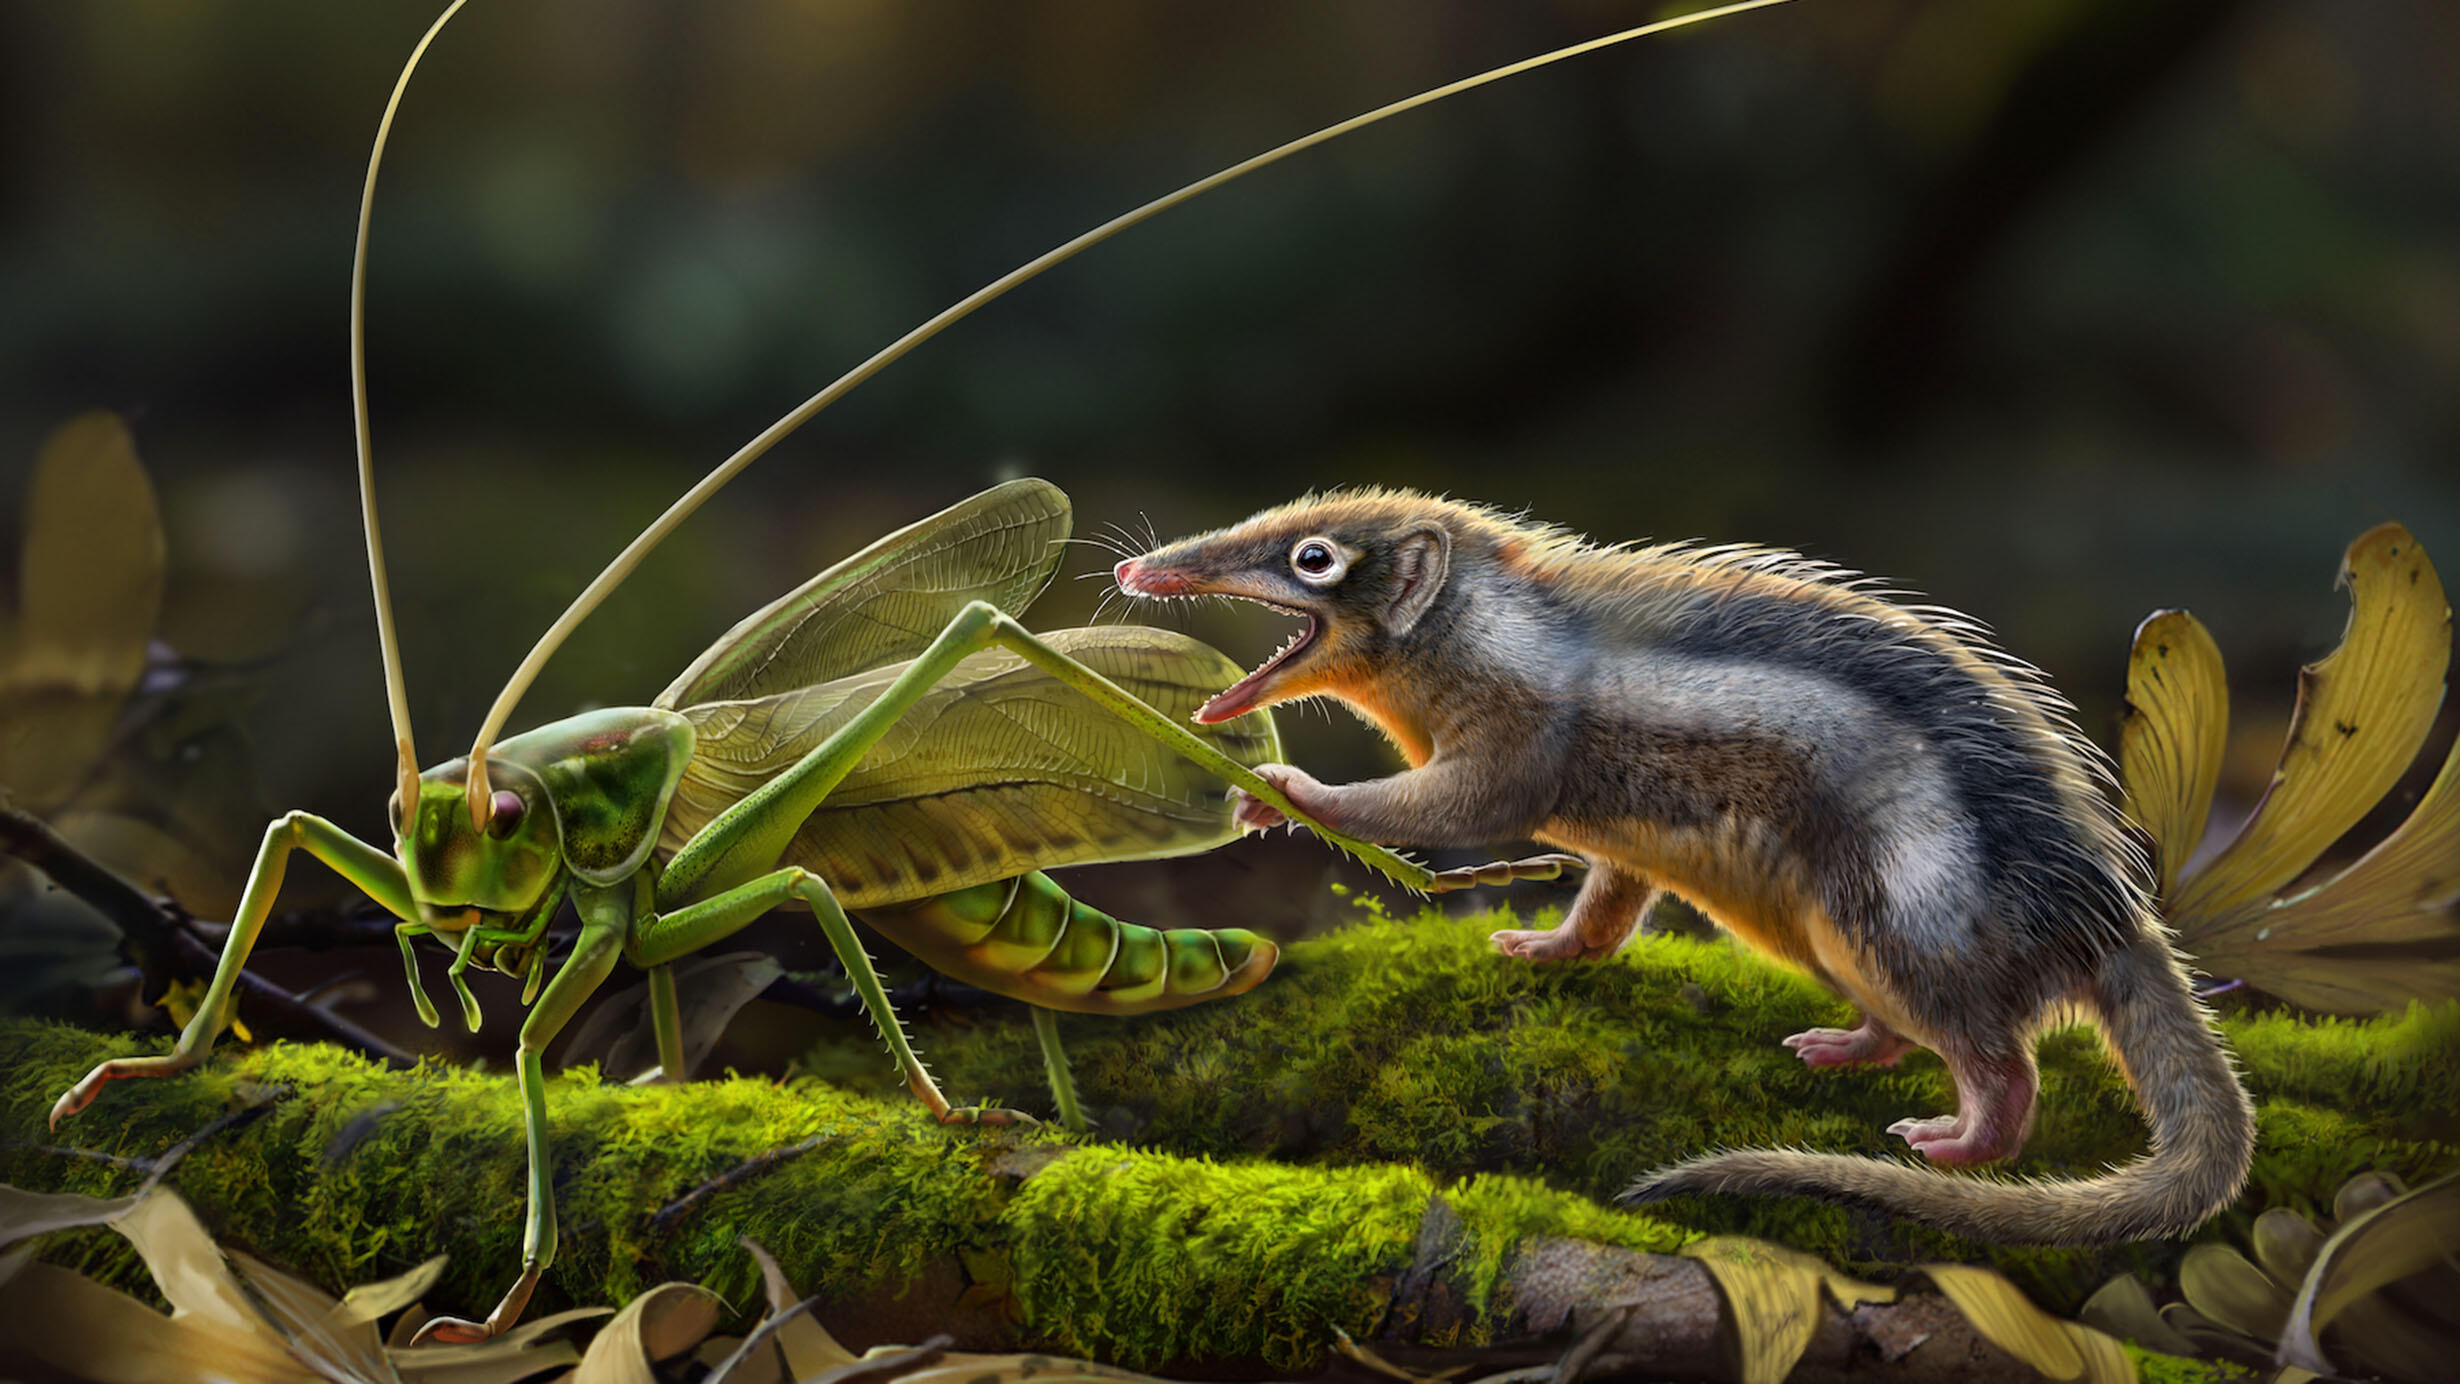 Artist's rendering of a fereedocodon chowi small mammal approaching a similarly sized grasshopper with a long, open mouth full of sharp teeth.